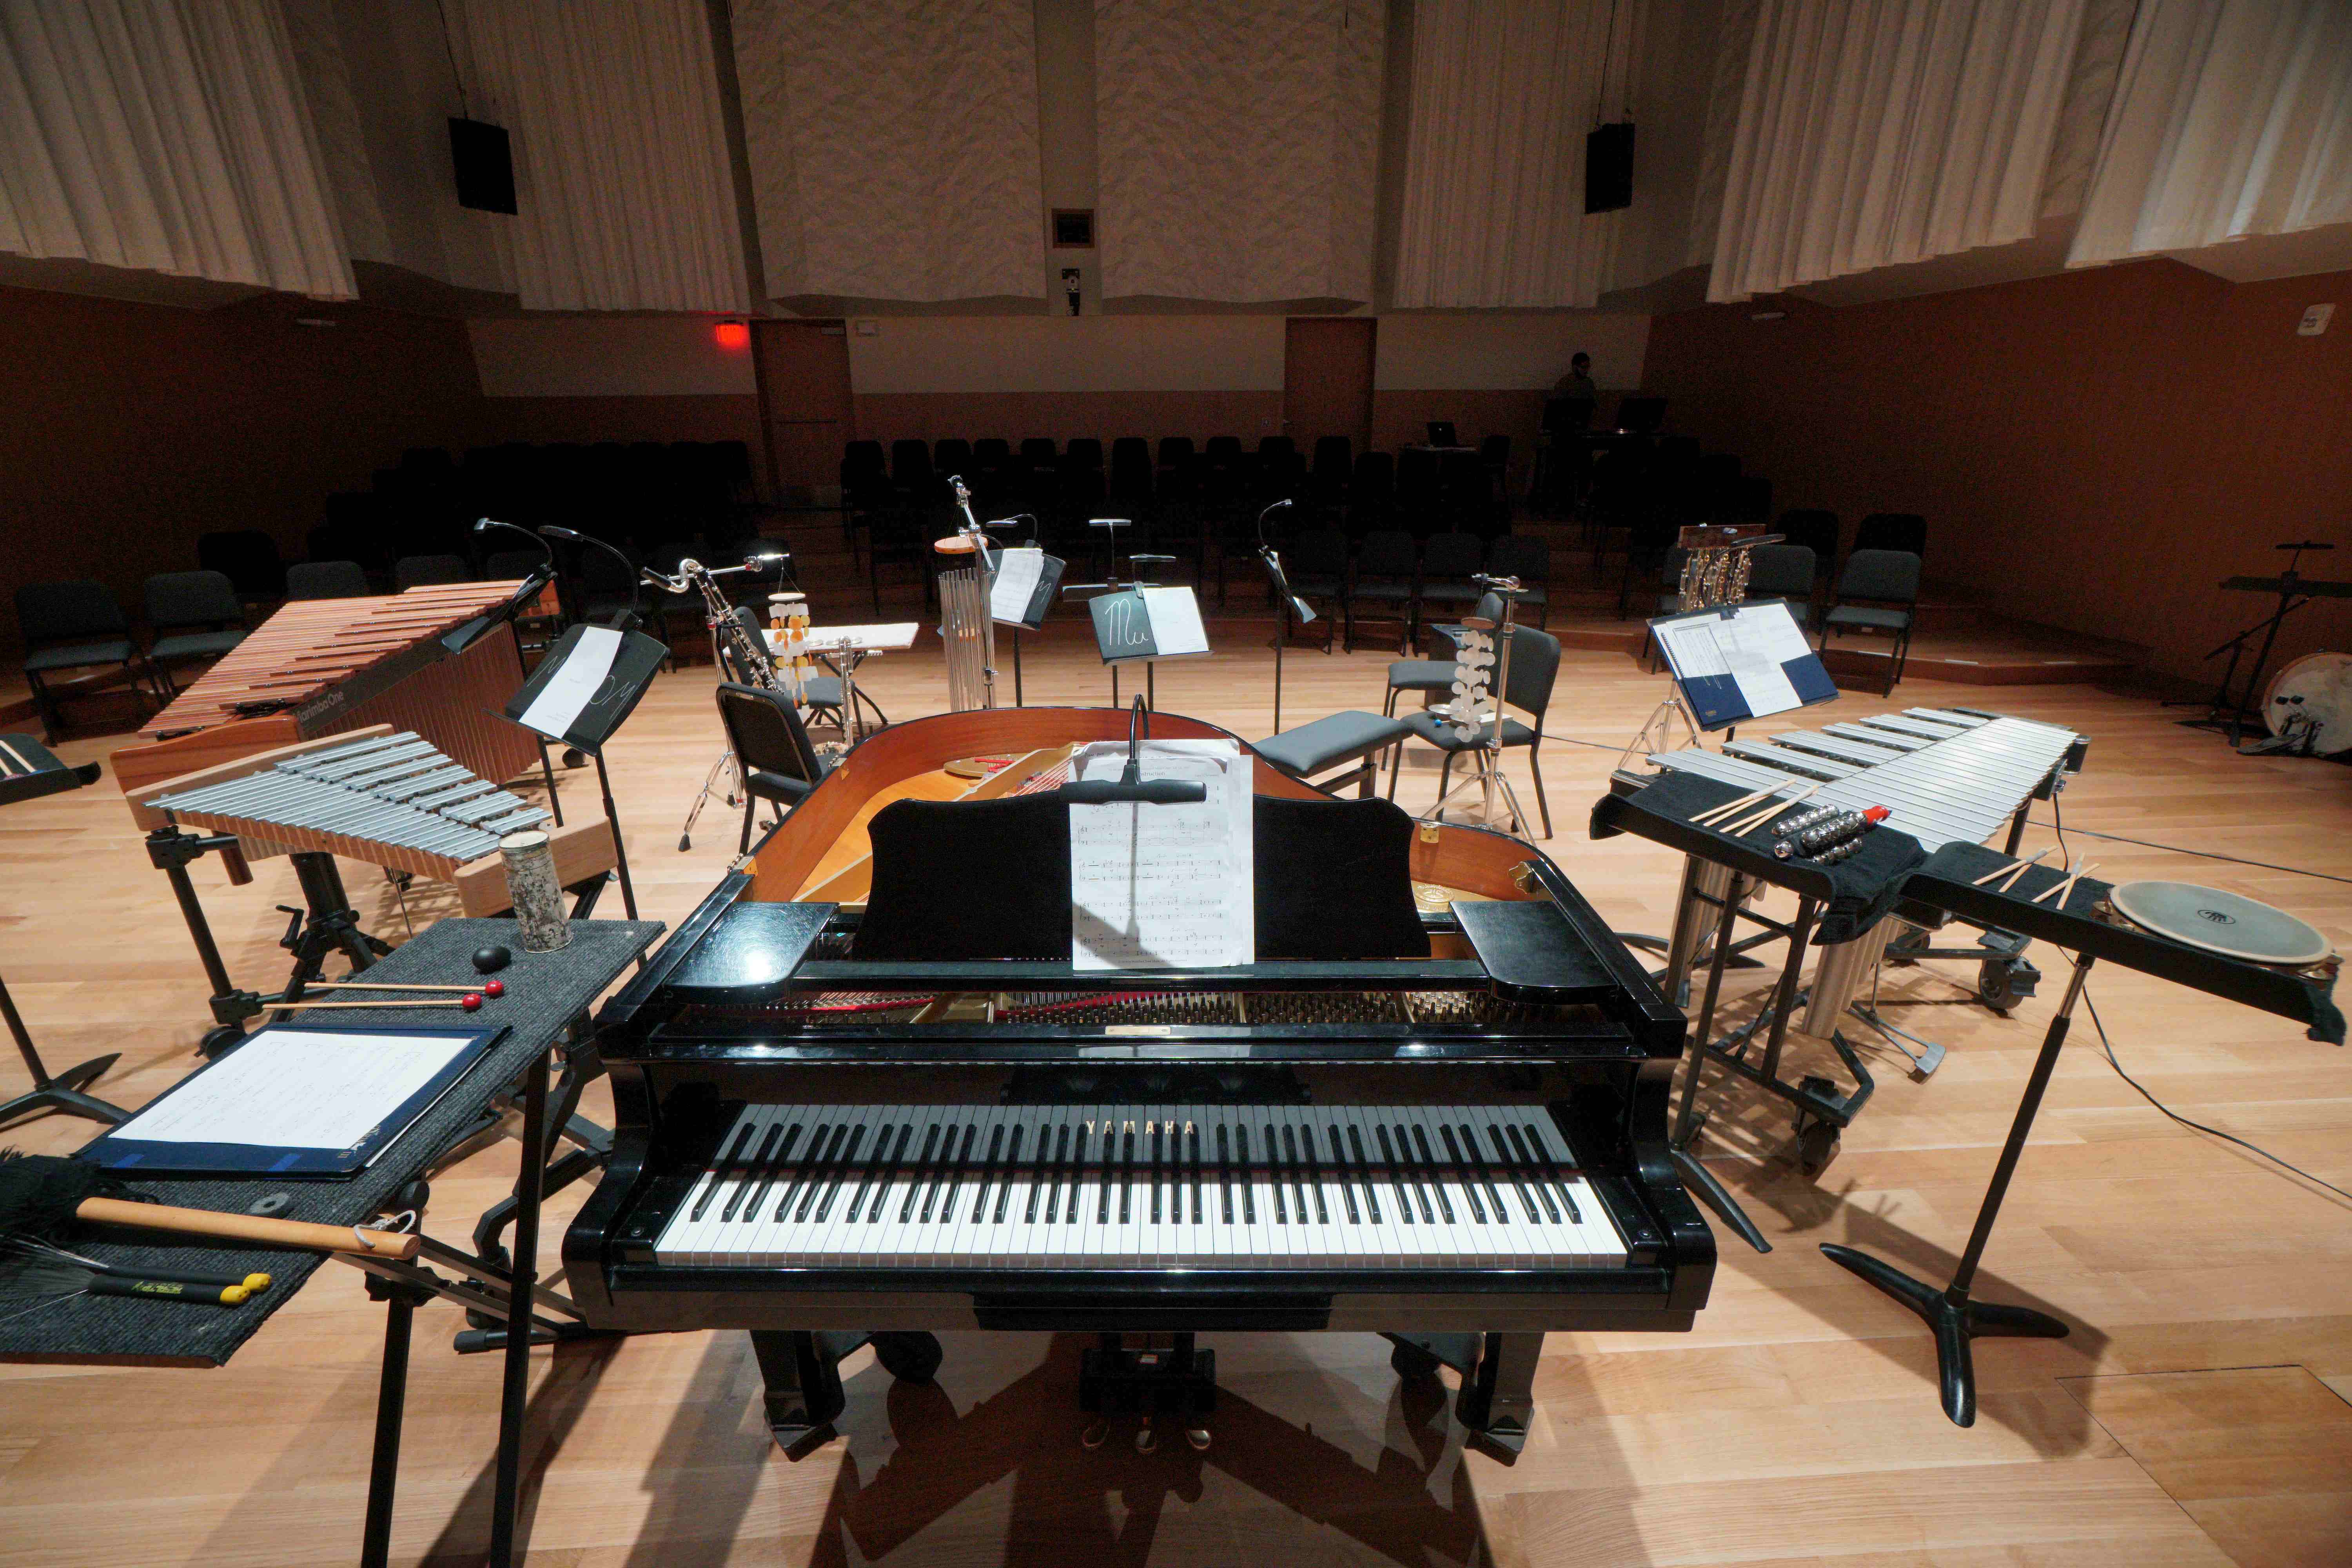 Instruments set up for an esnemble performance with a piano in the foreground